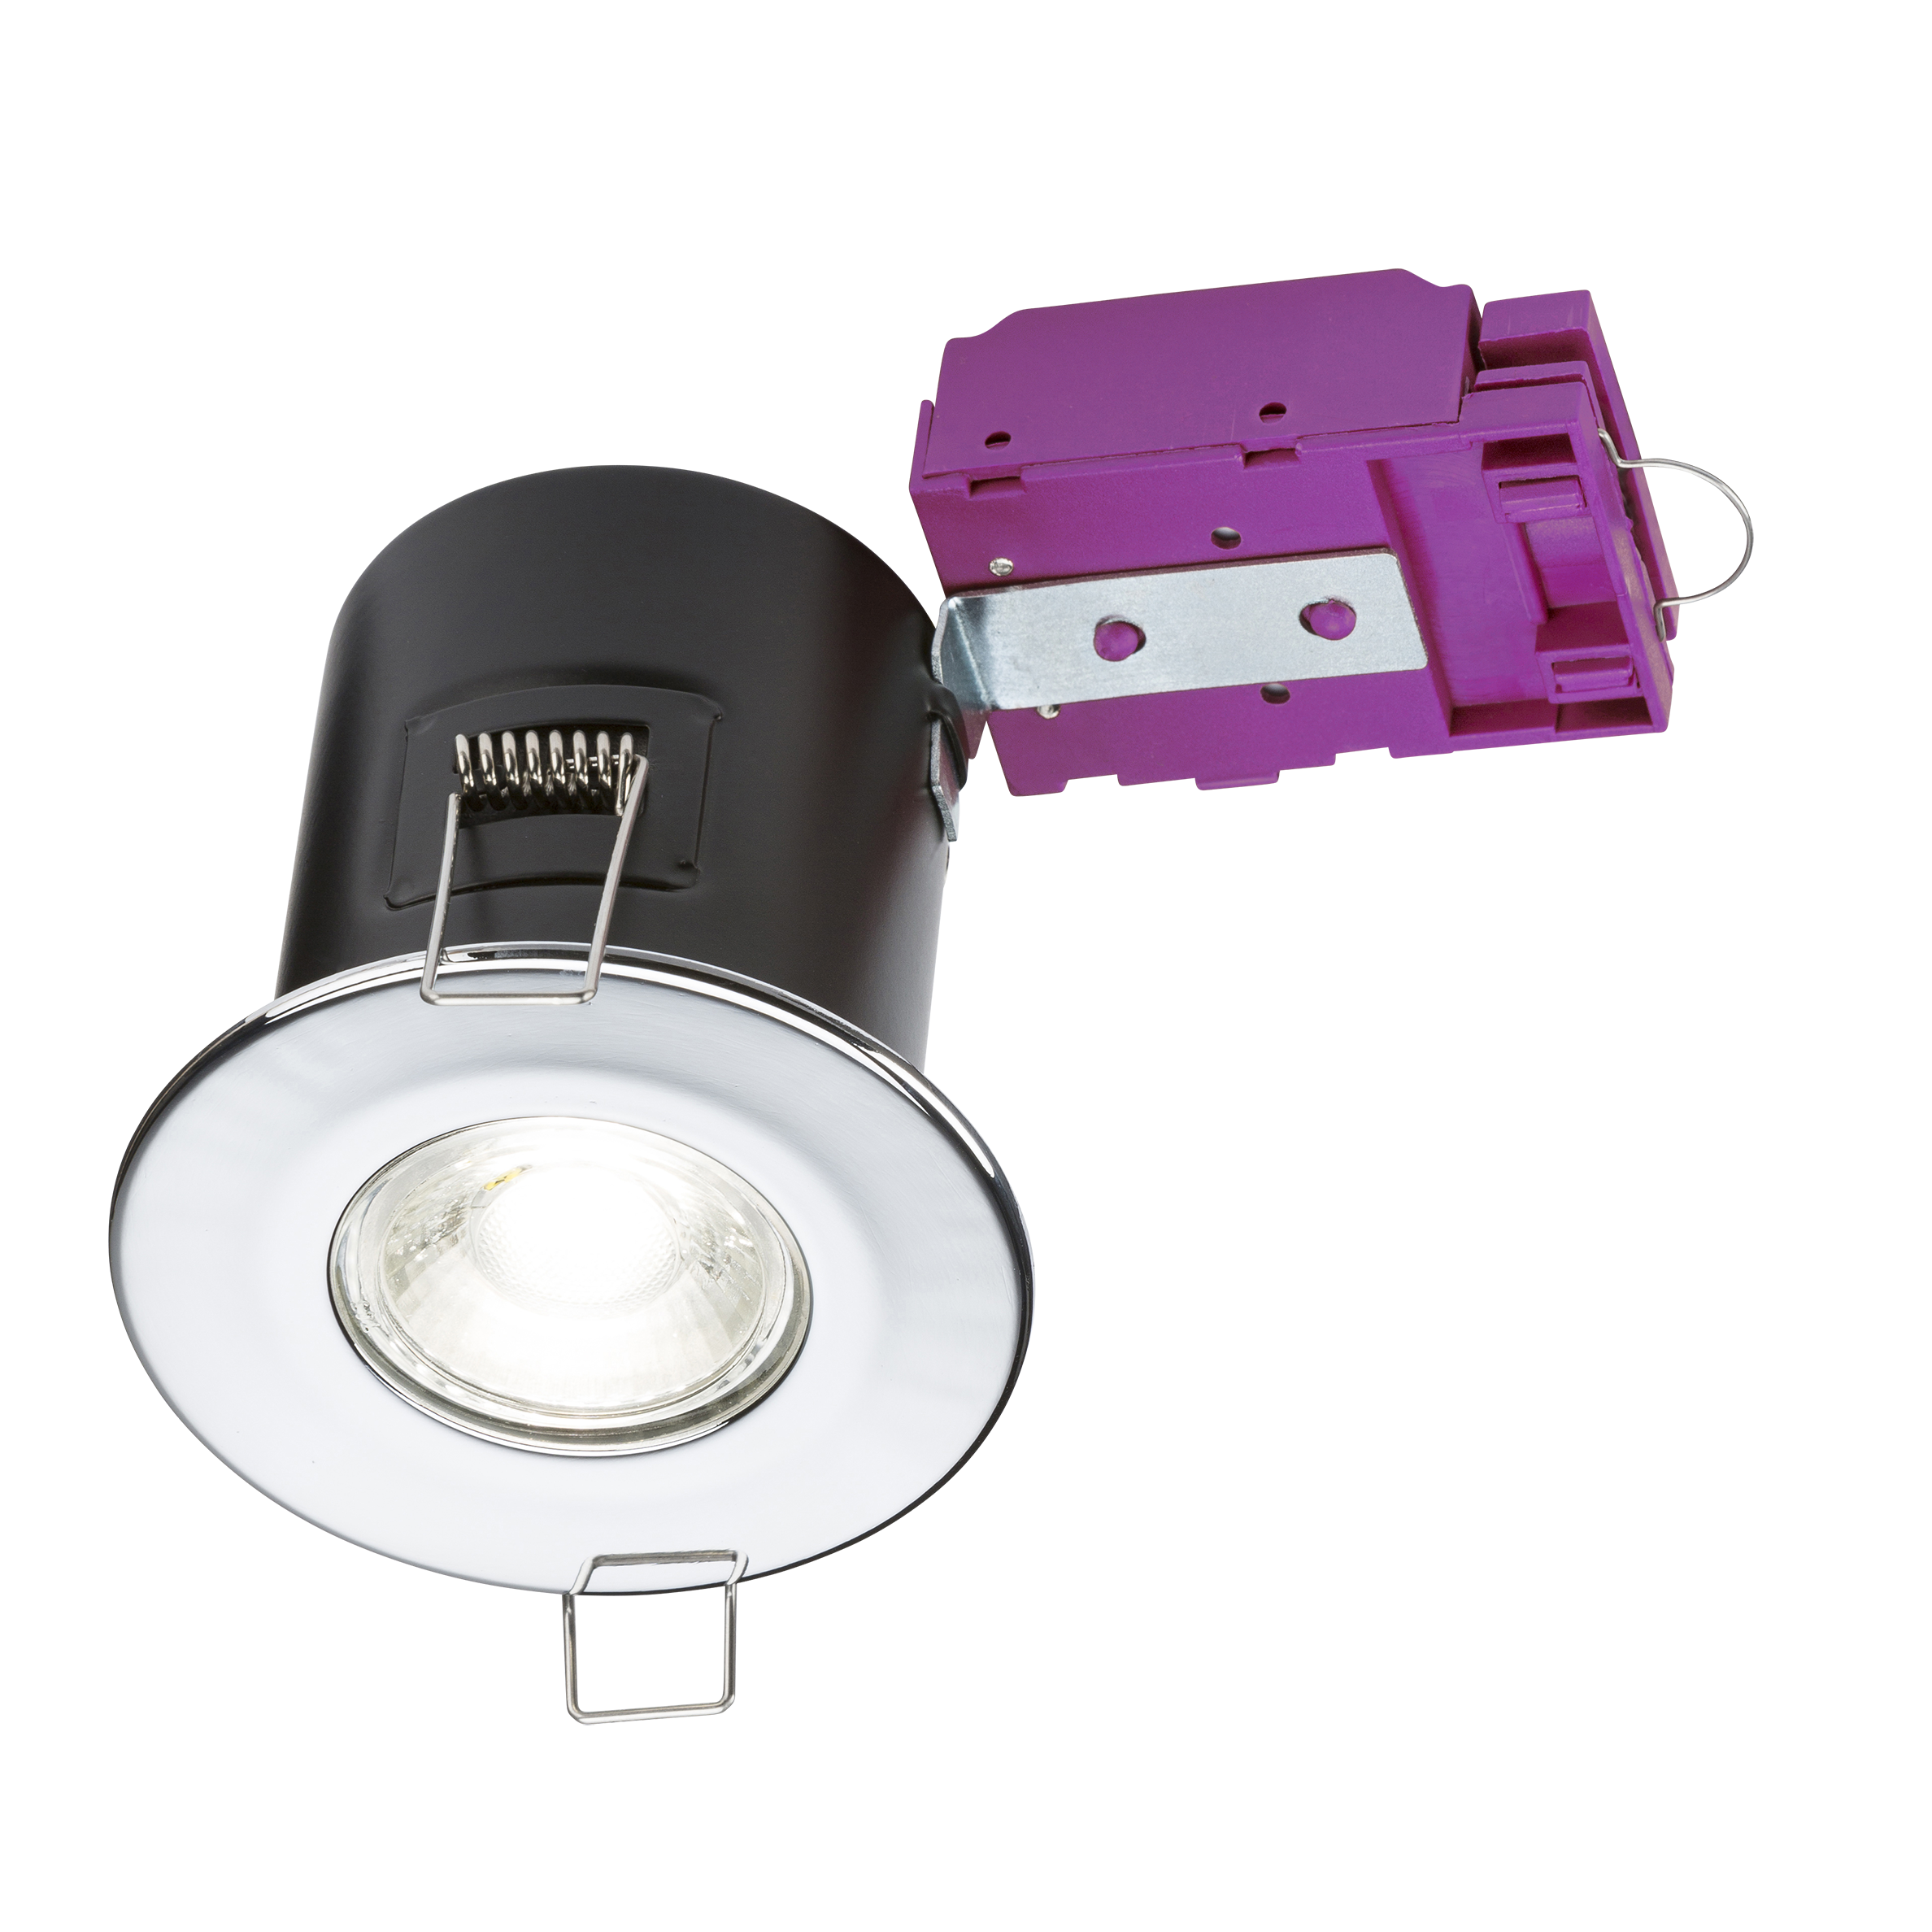 230V Fixed GU10 Fire-Rated Downlight Chrome - VFCDC 